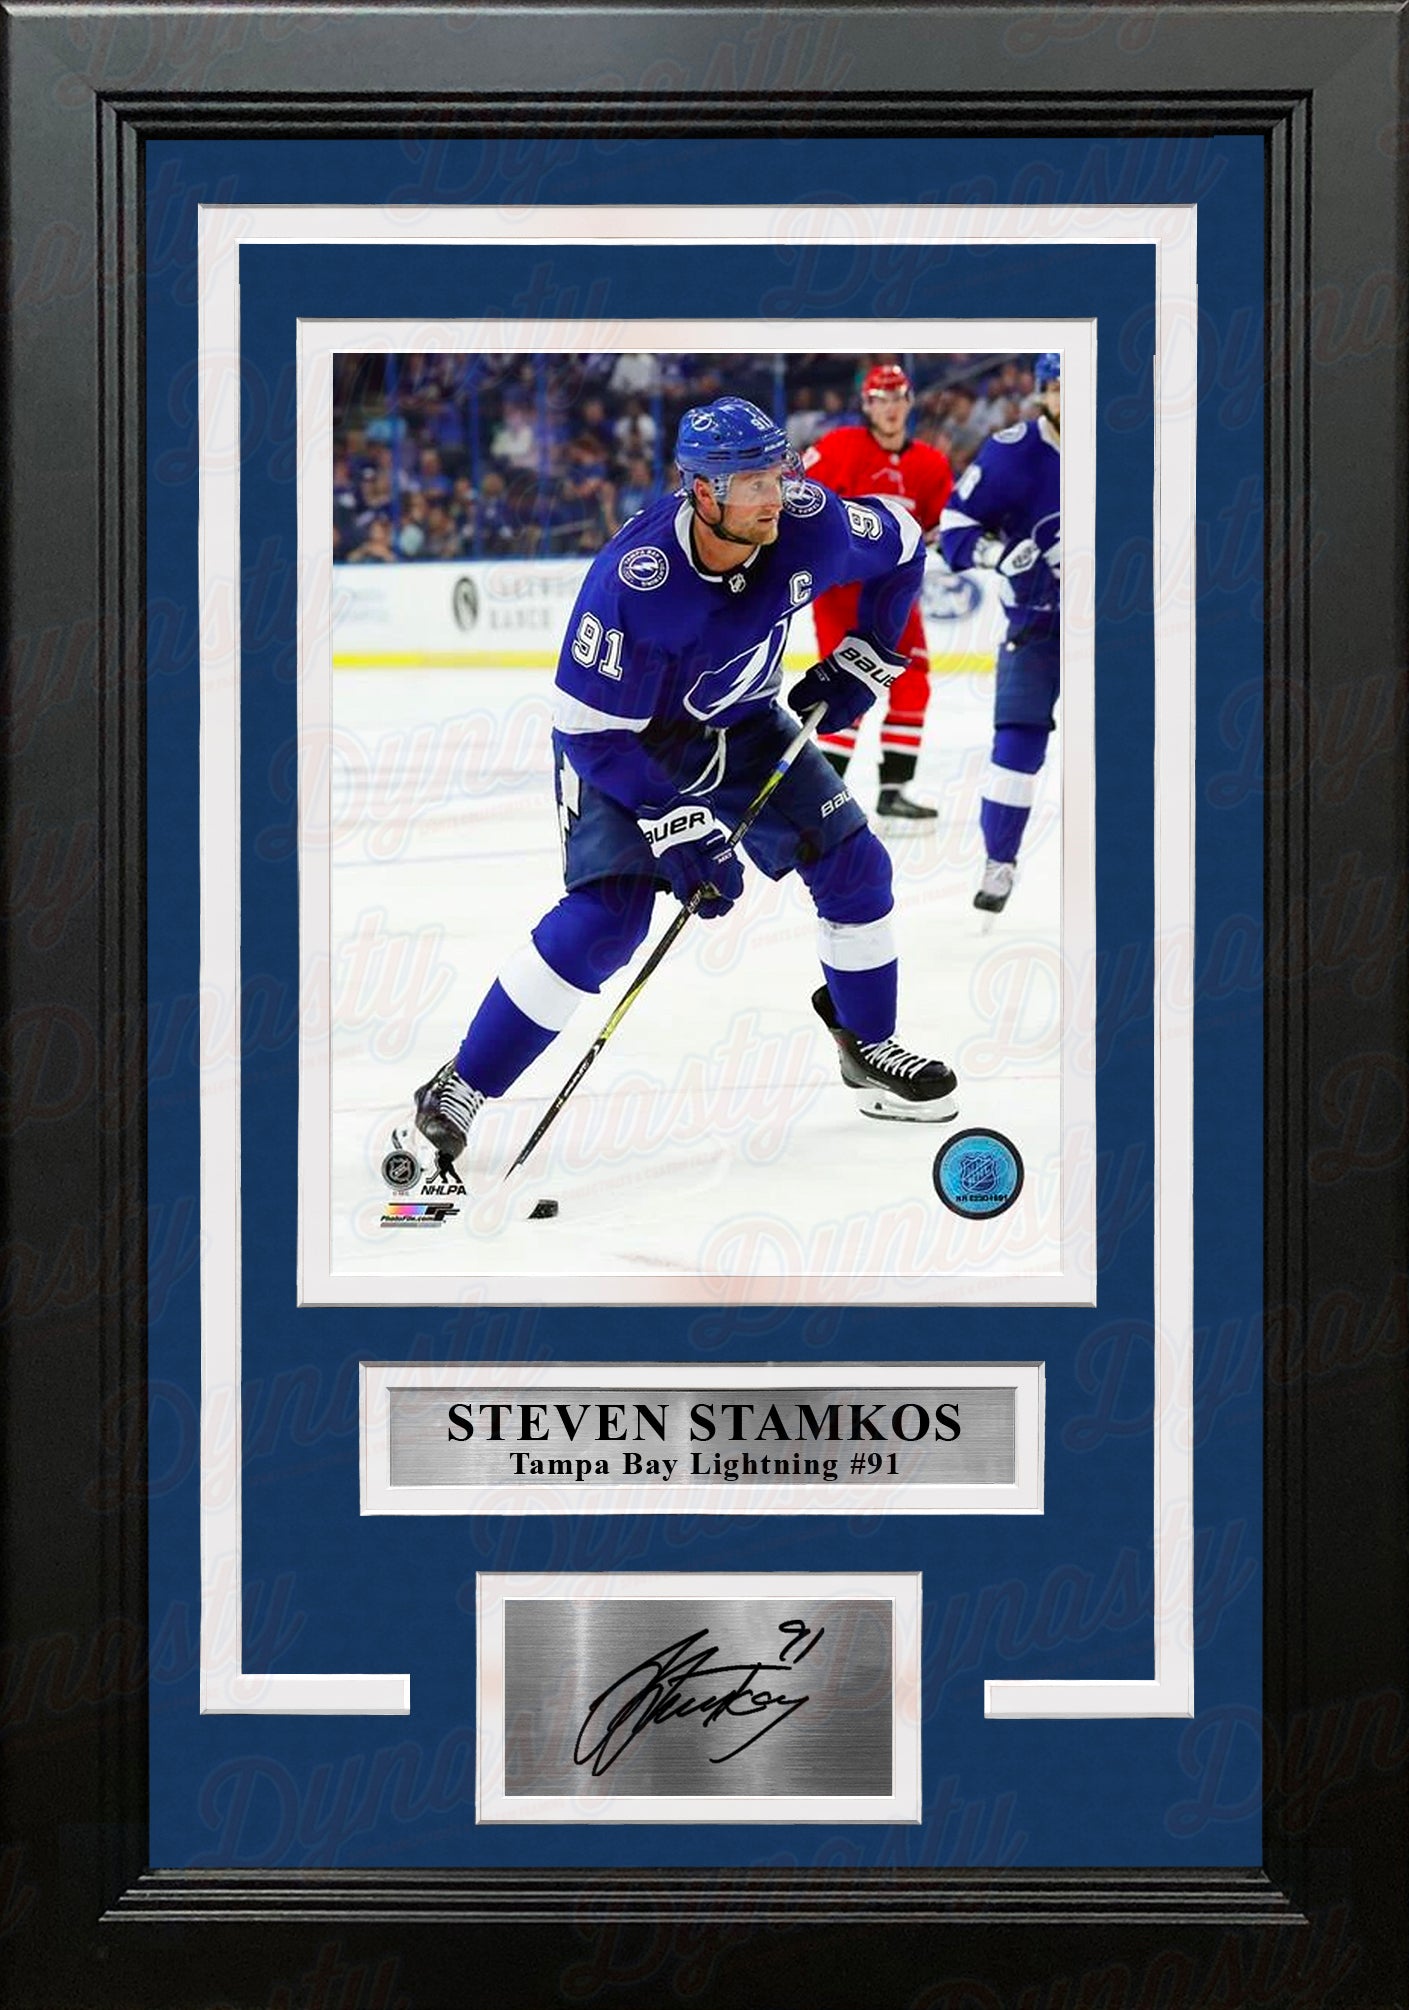 Steven Stamkos Tampa Bay Lightning Framed Autographed 20 x 24 in Focus Photograph with Best Hockey Town Ever Inscription - Limited Edition of 20